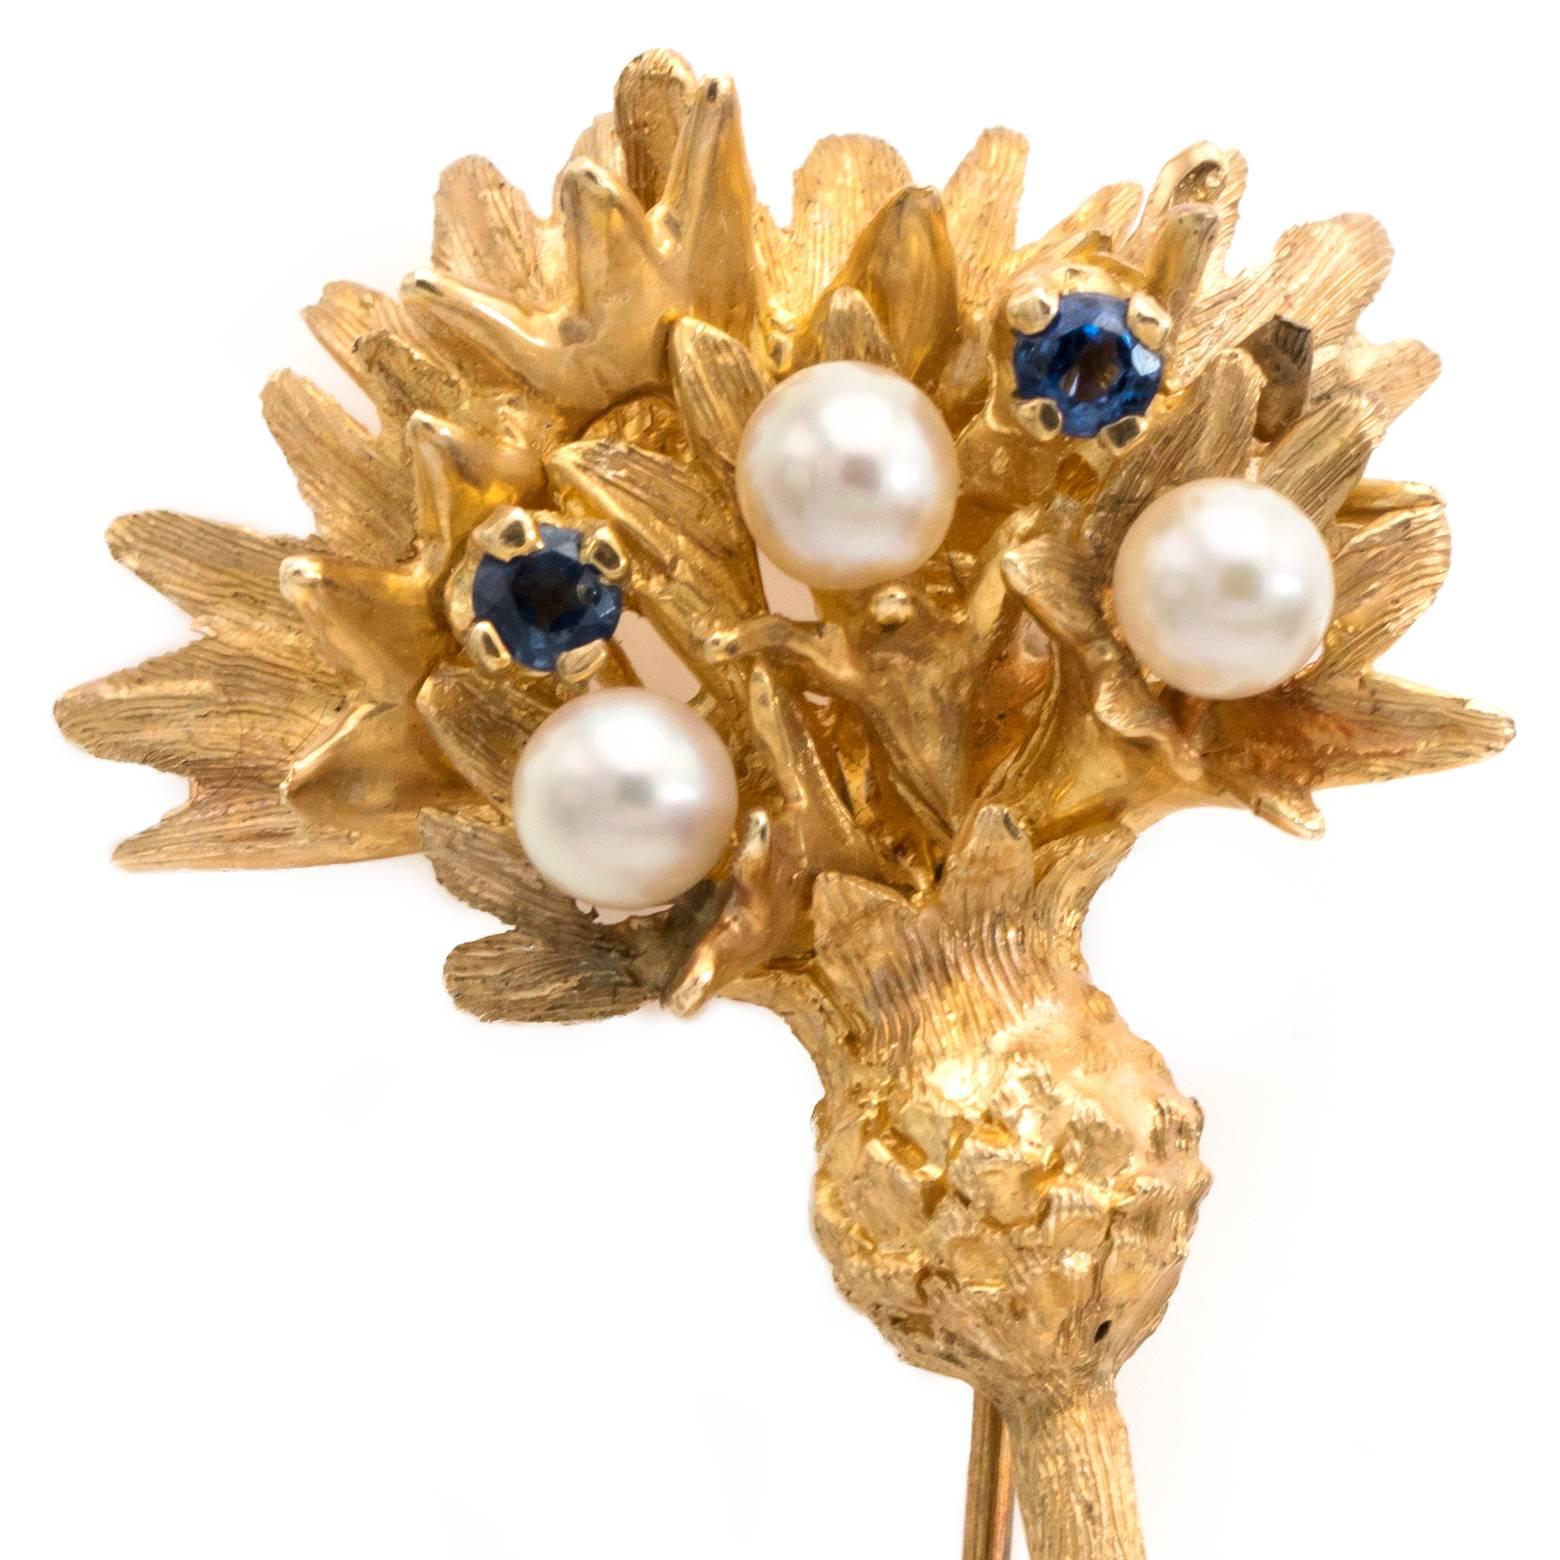 Botanical teasel Vintage brooch 14K yellow gold floral plant with 3 cultured pearl of 3 mm with 2 sapphires and 2 emeralds of 2 mm.
Stamped 14K IPS, matt finish on surface of the brooch.